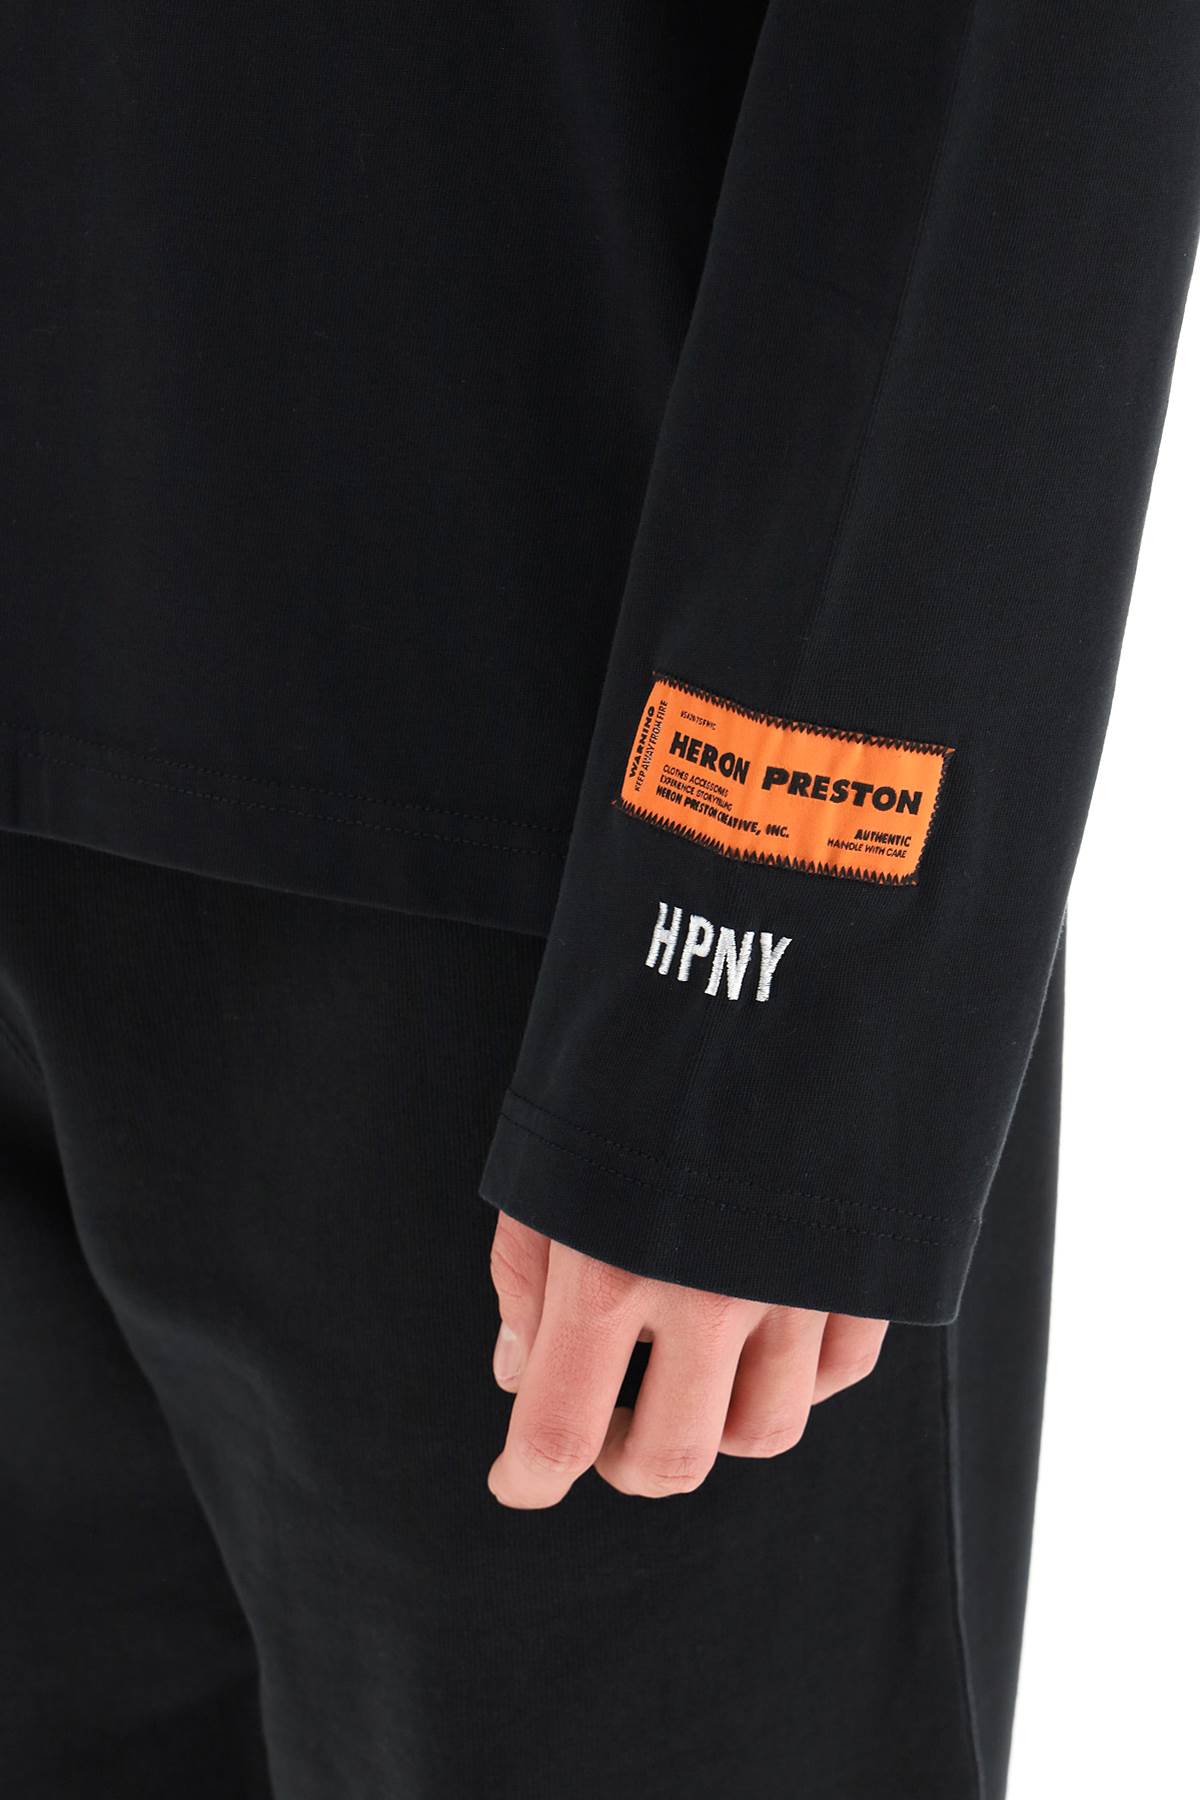 Shop Heron Preston Hpny Embroidered Long Sleeve T-shirt In Black